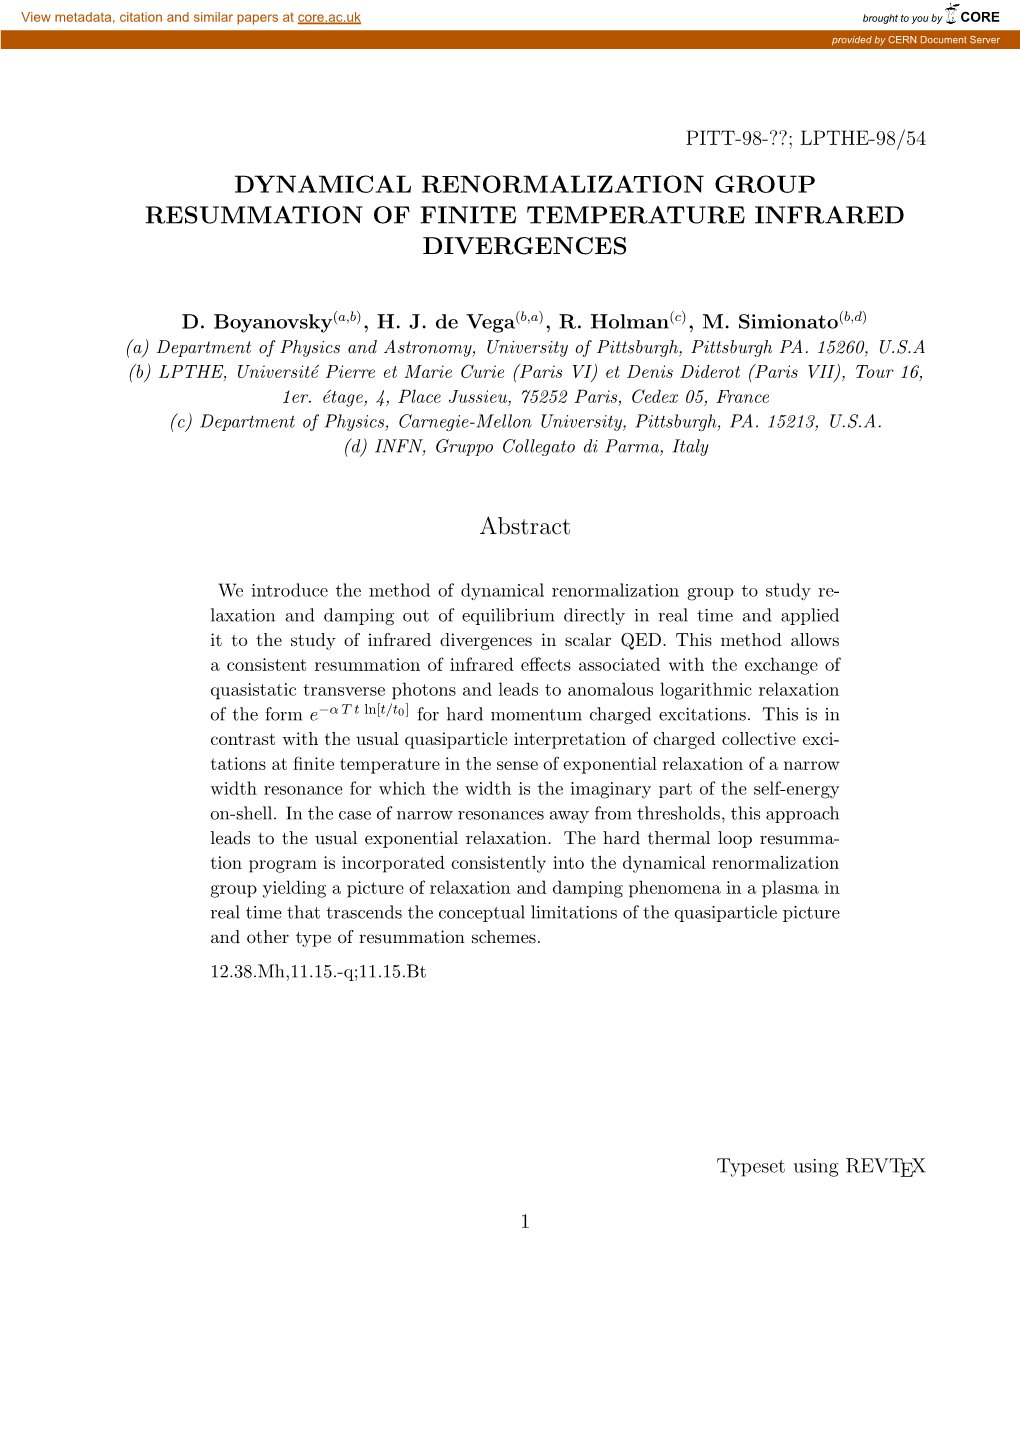 Dynamical Renormalization Group Resummation of Finite Temperature Infrared Divergences